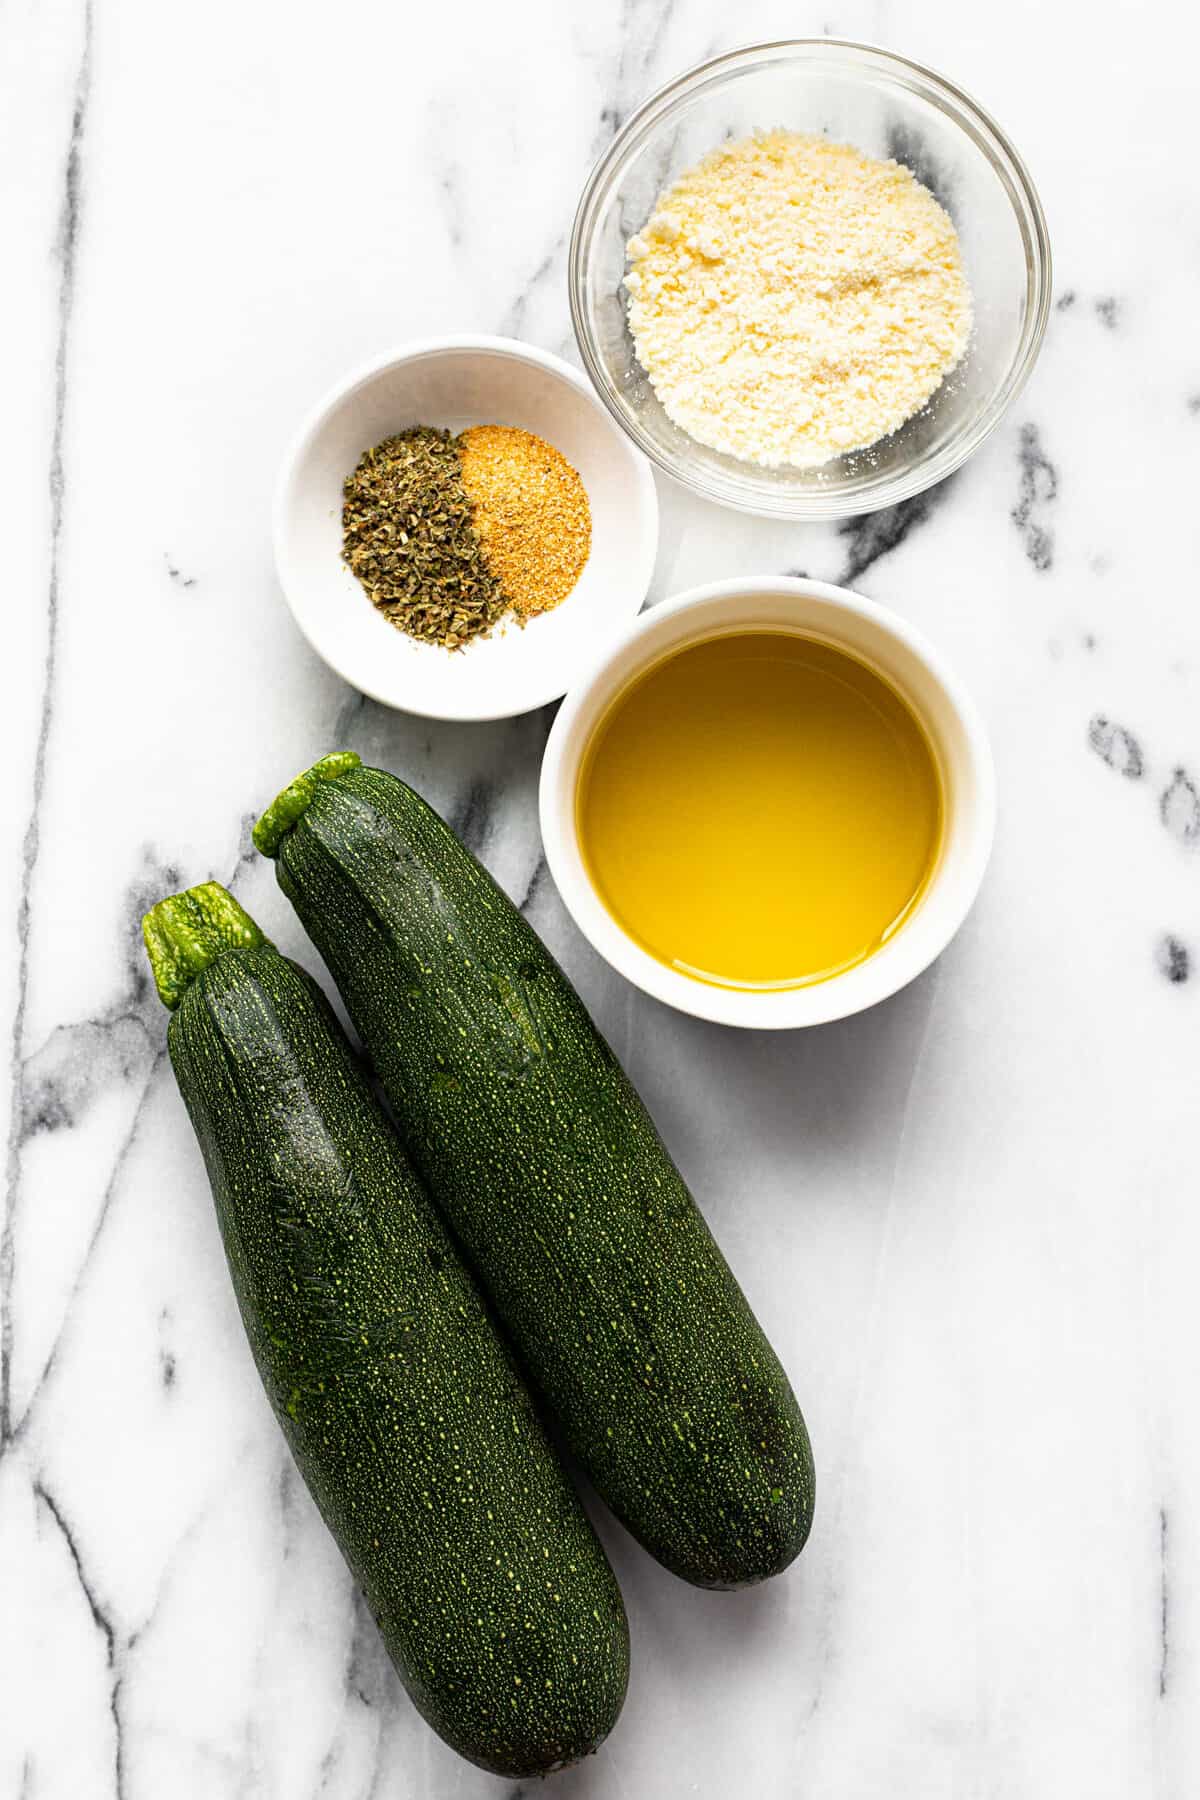 White counter top with bowls of ingredients to make air fryer zucchini.